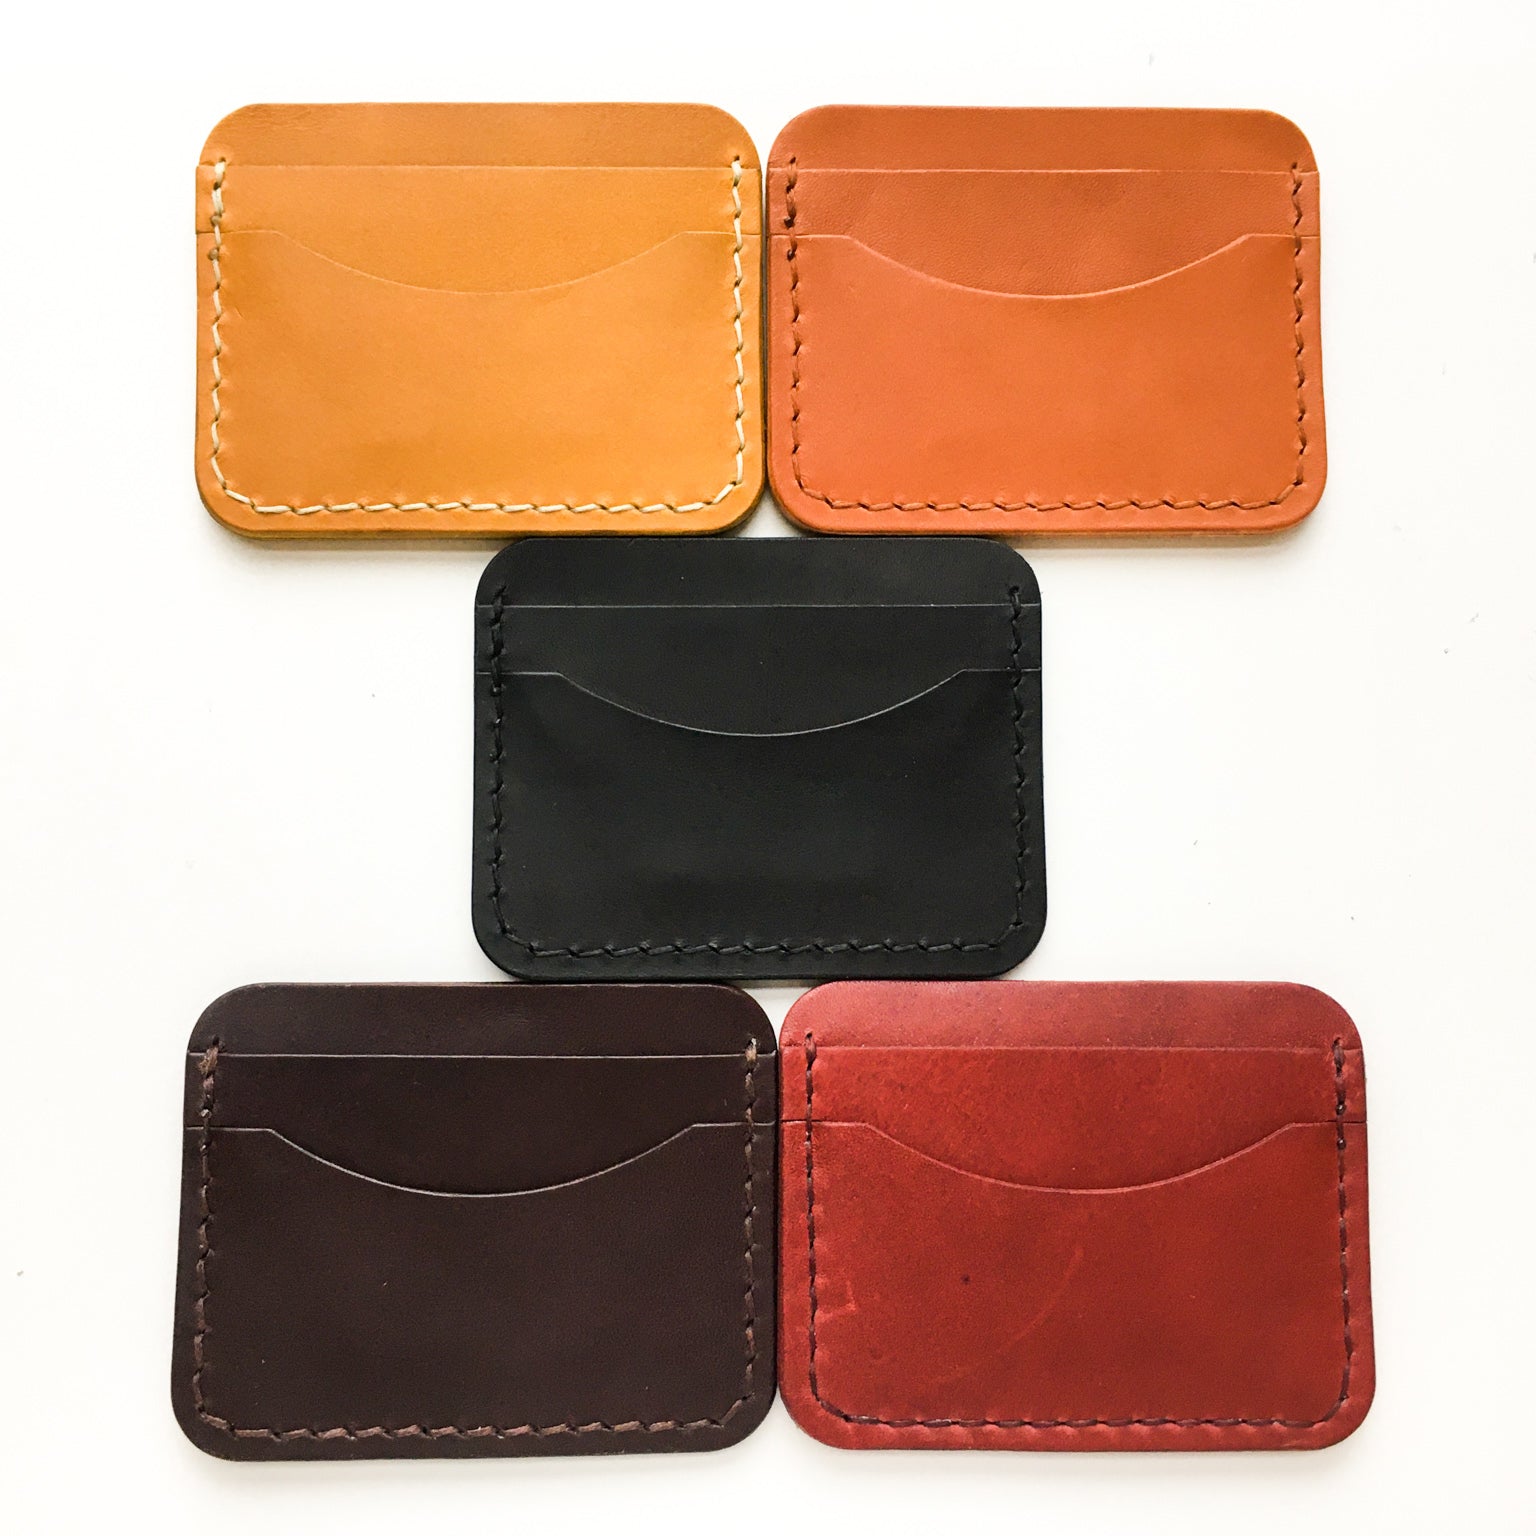 A collection of our leather card holders shot from the back  in mustard, tan, black , brown and red.